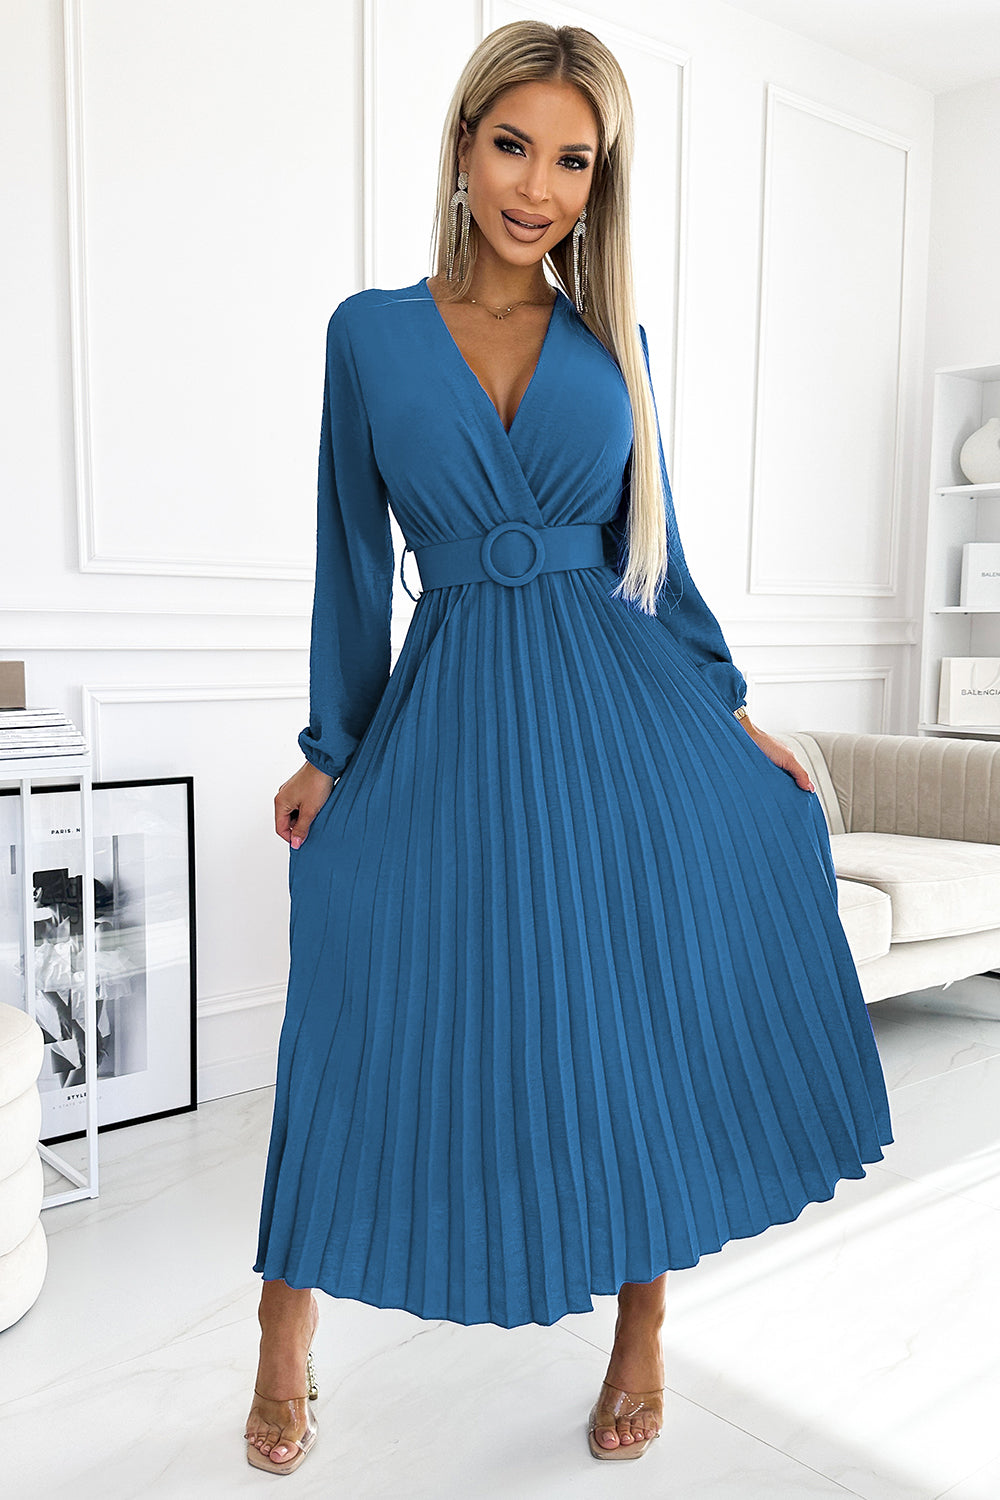 Numoco Basic 504-5 VIVIANA Pleated midi dress with a neckline, long sleeves and a wide belt - JEANS-0